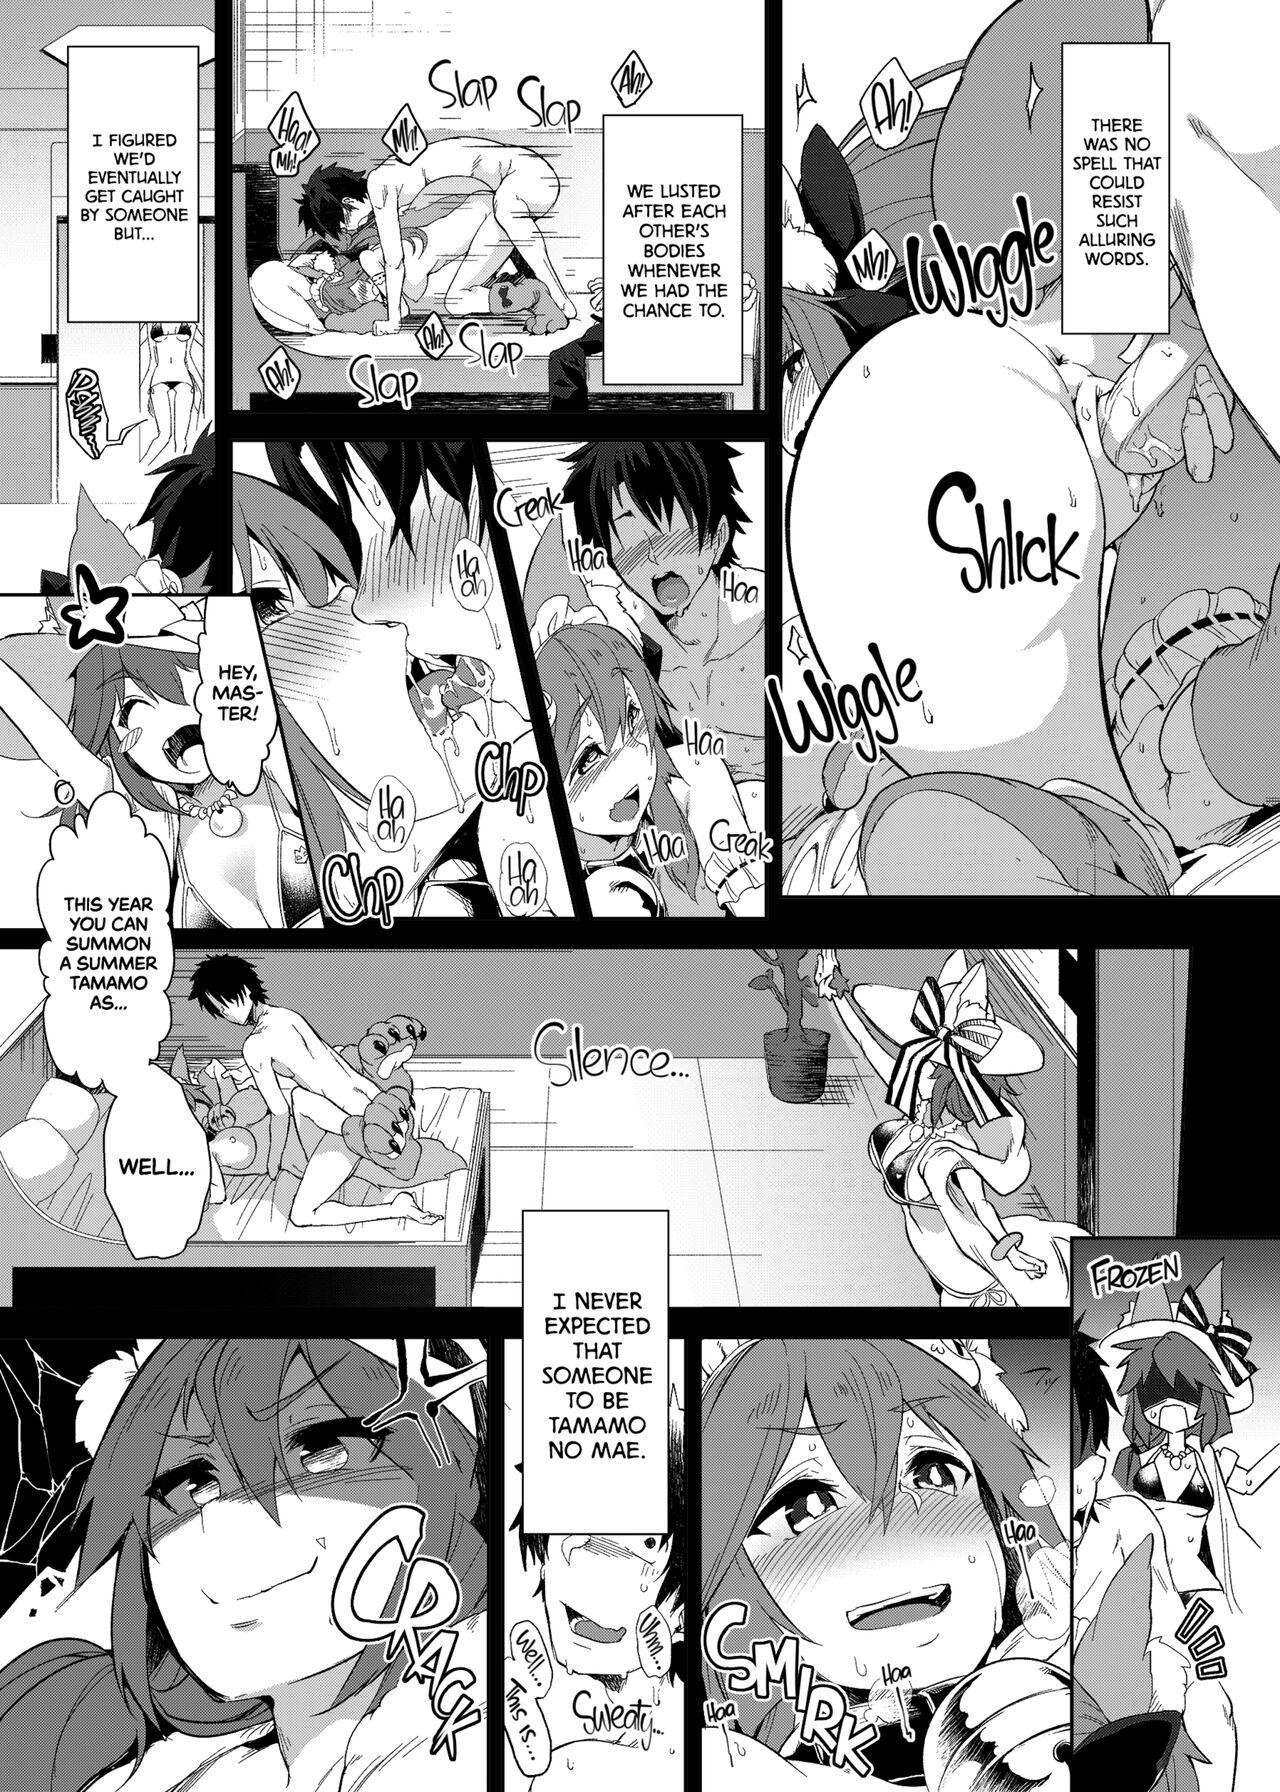 Compilation Hatsujou Cat Fight - Fate grand order Love - Page 5